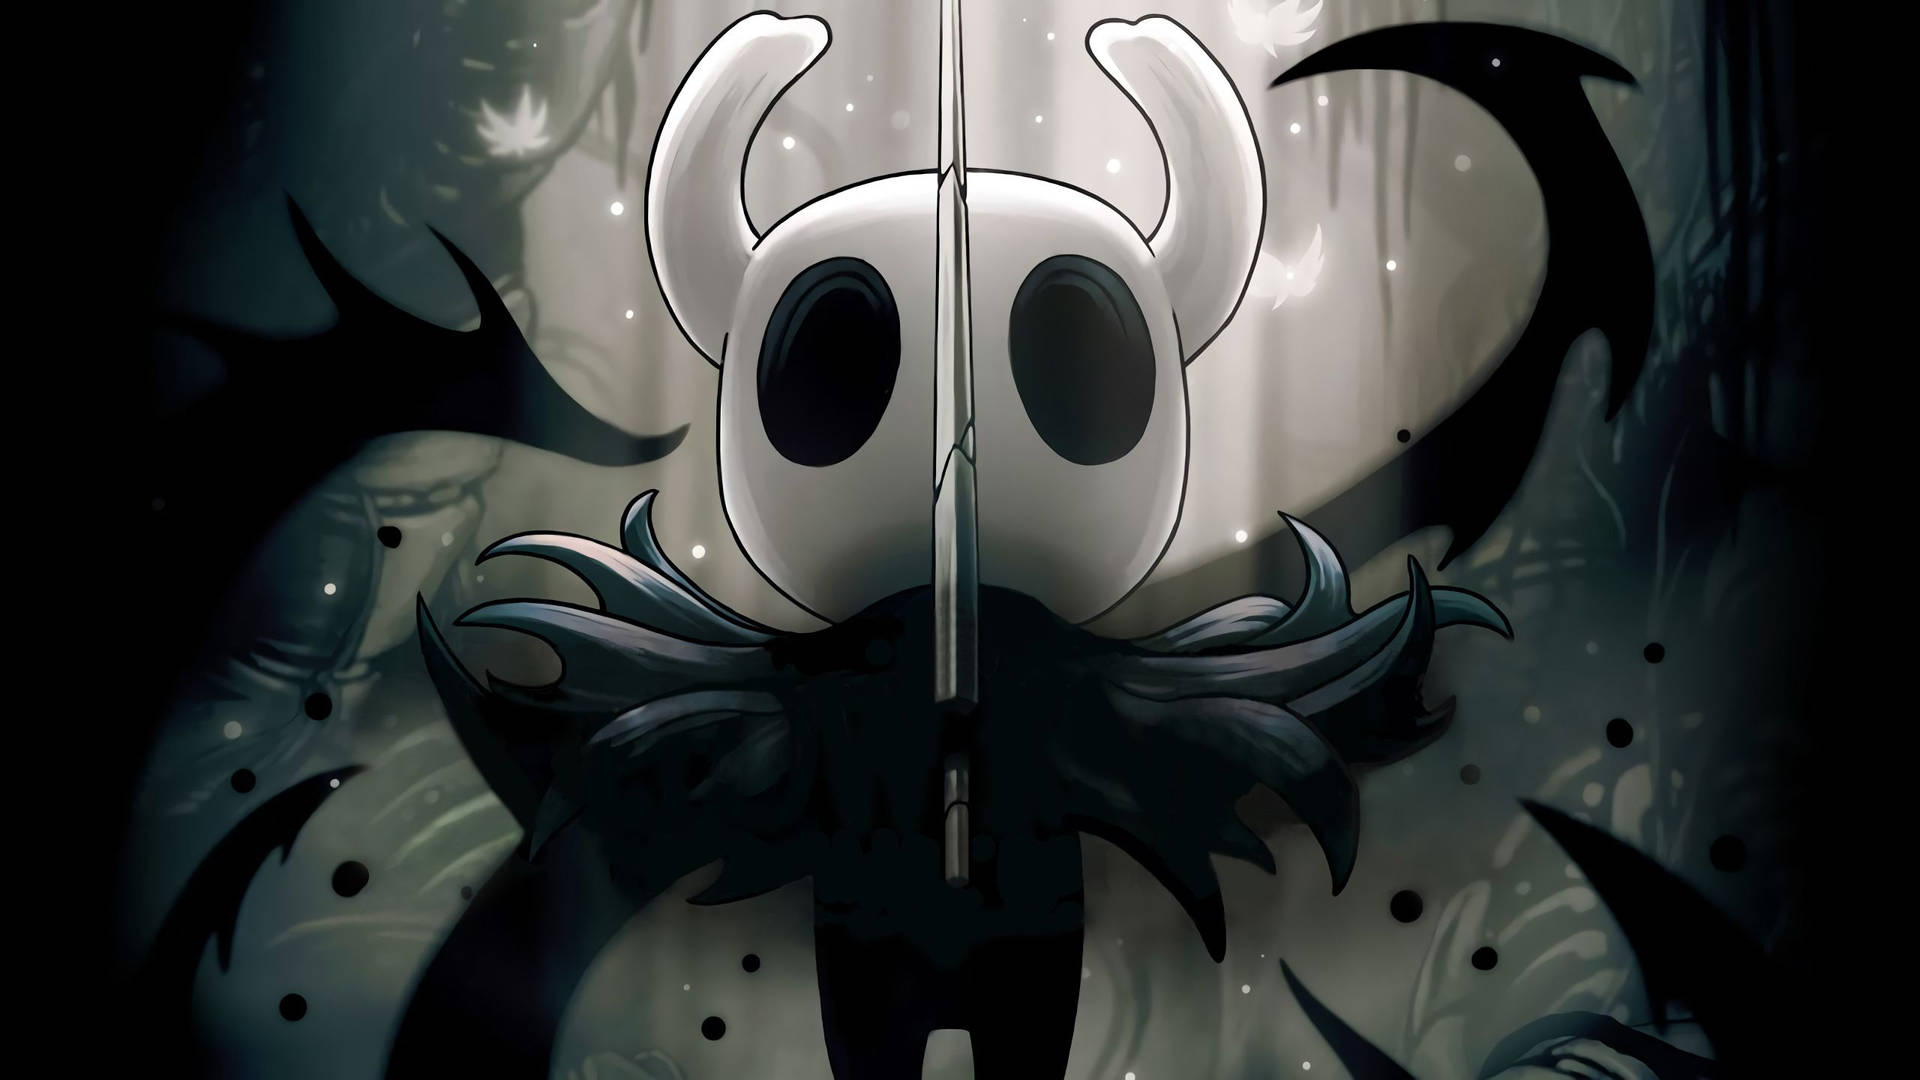 2560X1440 Hollow Knight Wallpaper and Background